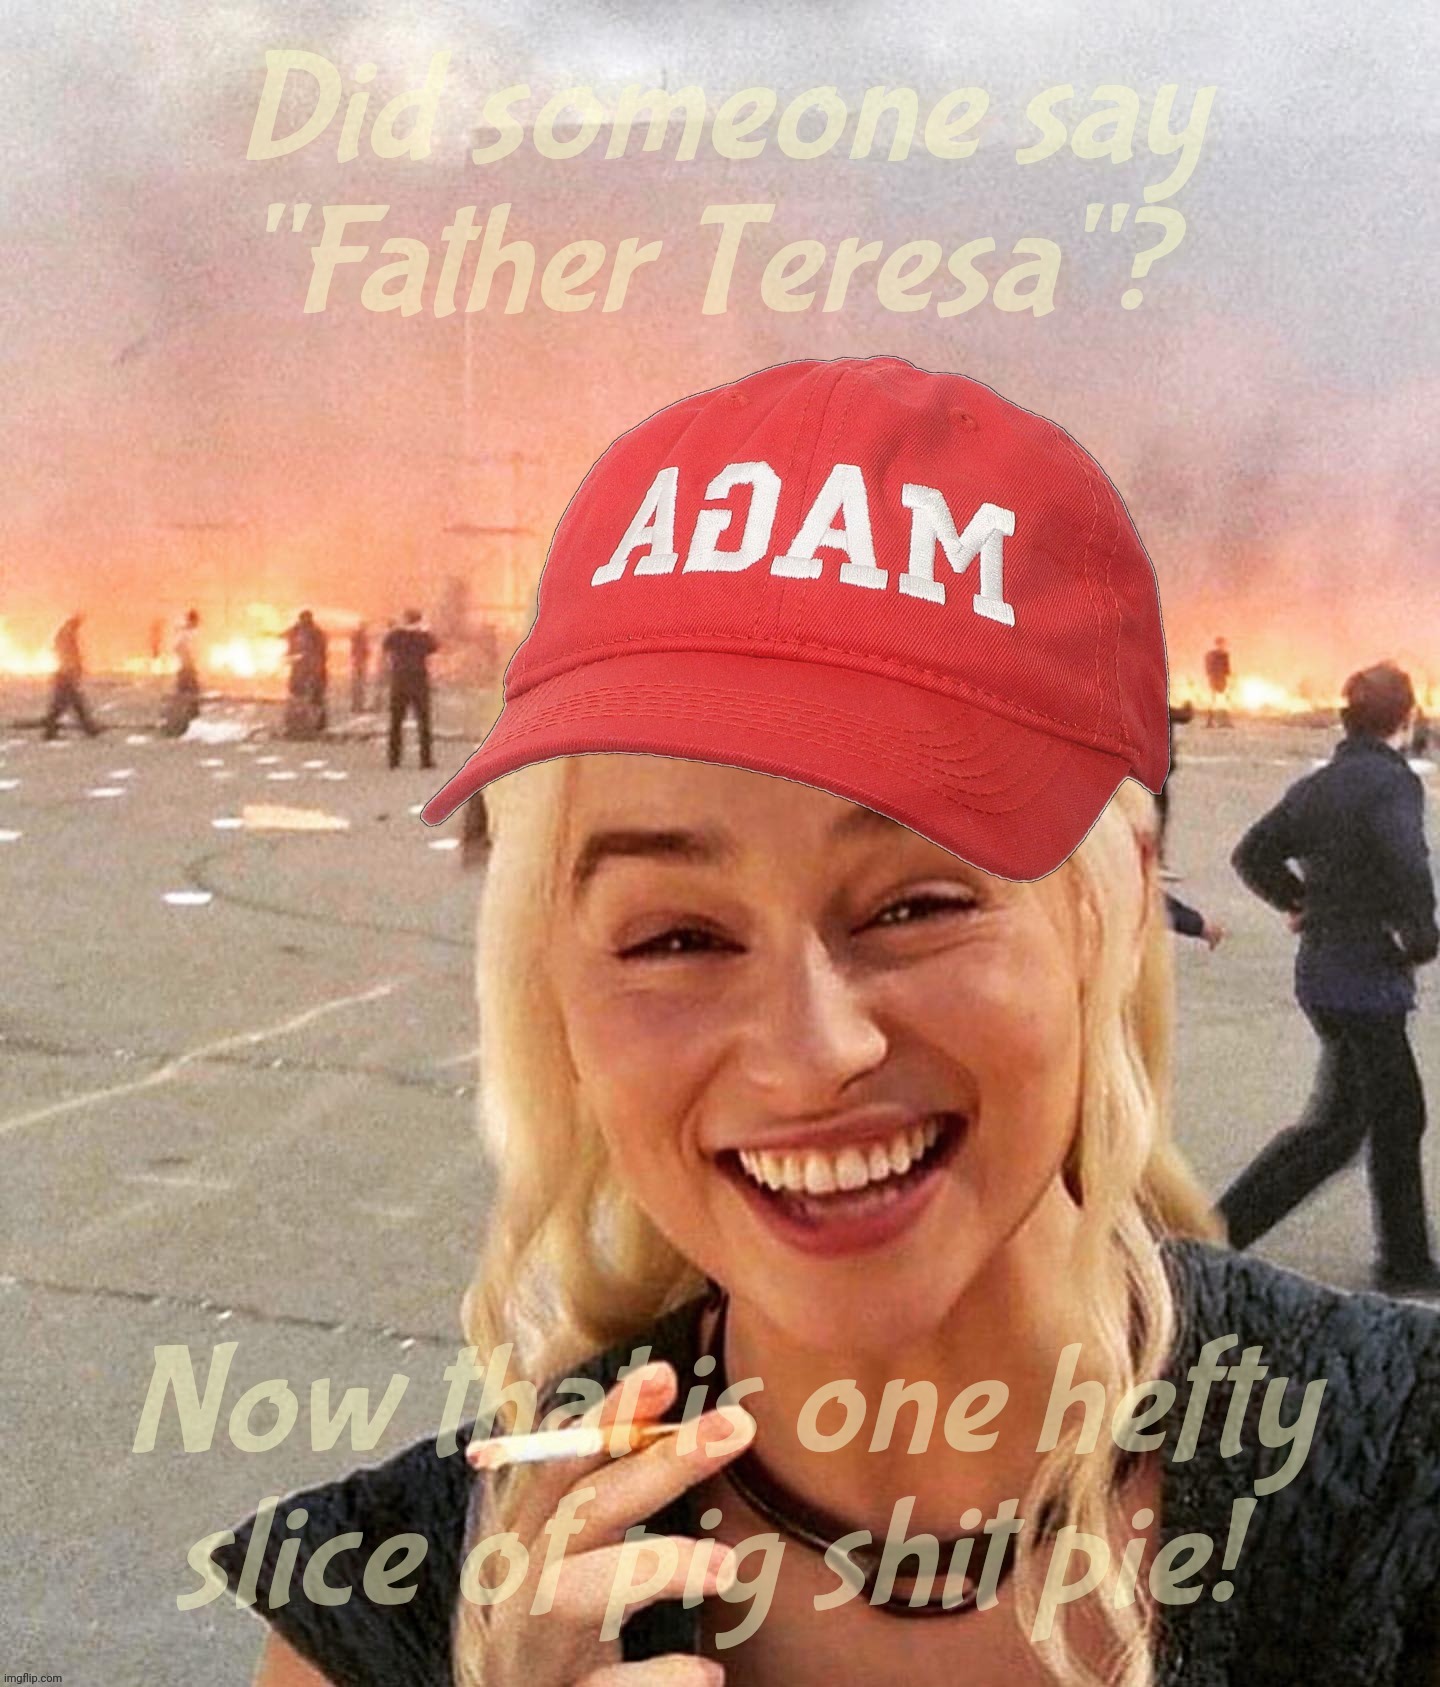 Some cringey Cult 45er with a sign saying  "Father Teresa" | Did someone say
"Father Teresa"? Now that is one hefty slice of pig shit pie! | image tagged in disaster smoker girl maga edition,father teresa,donald trump again,34 charges guilty,magats,the cringe is real | made w/ Imgflip meme maker